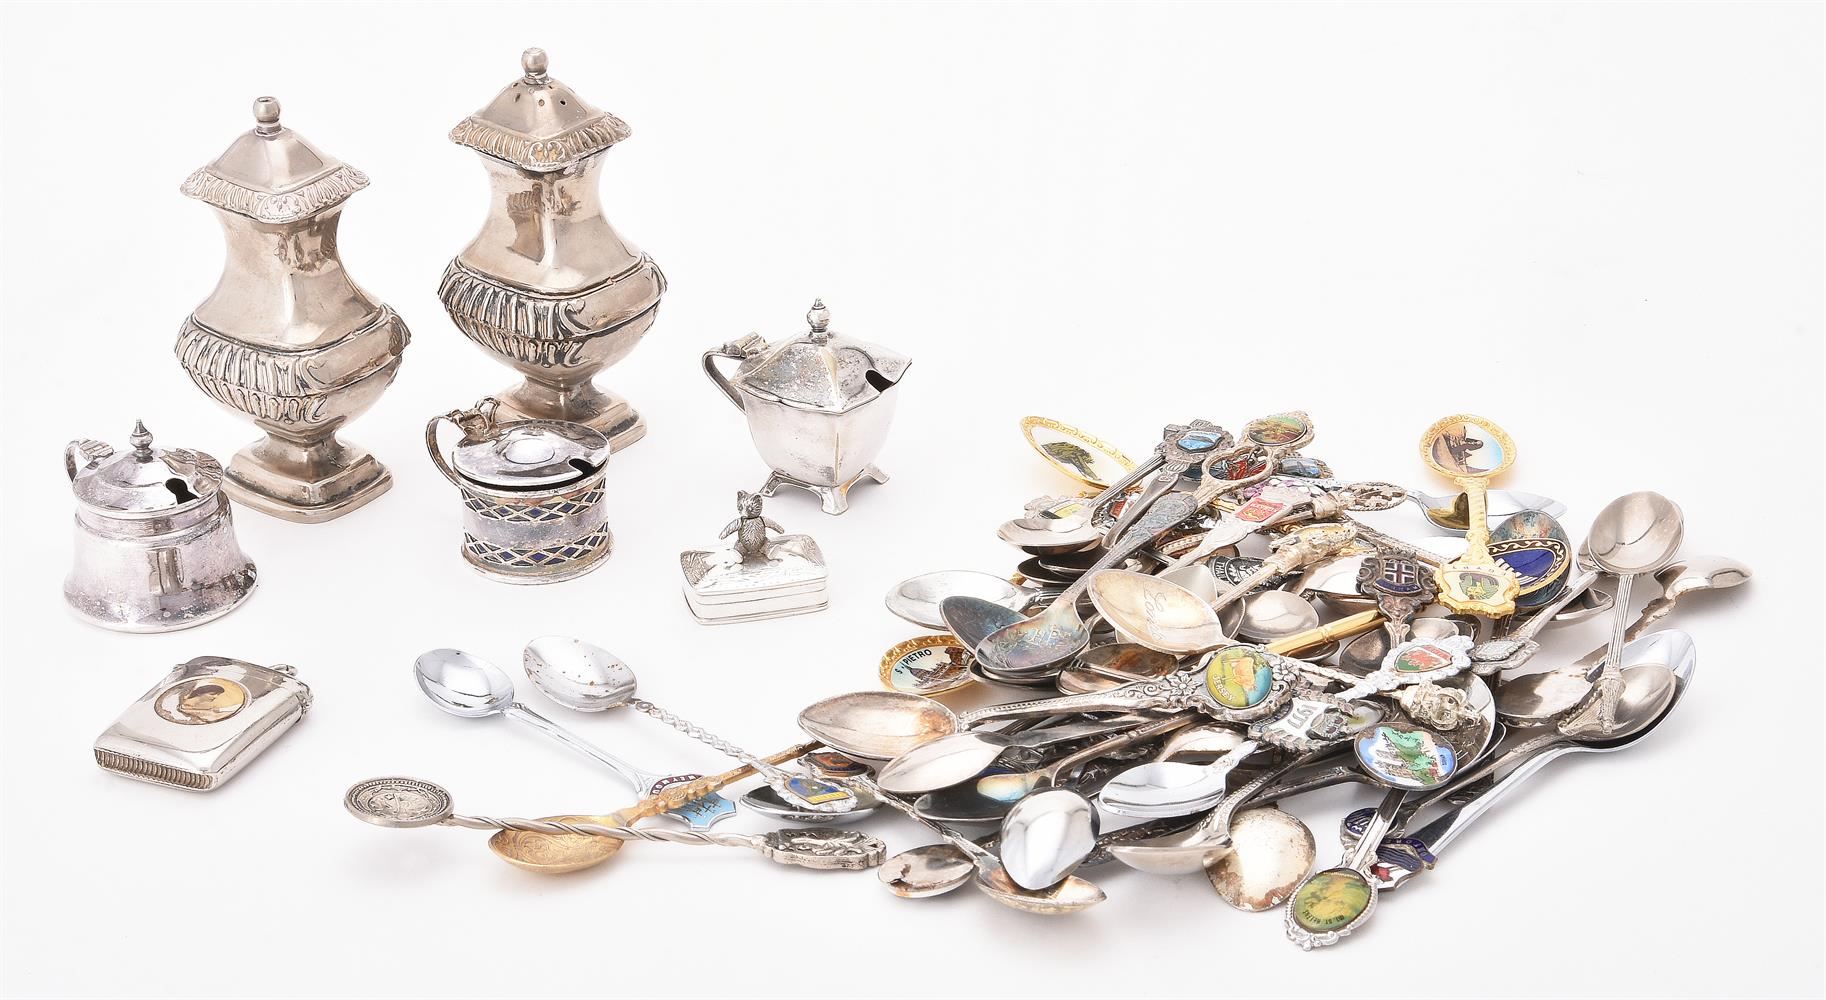 A collection of electro-plated souvenir spoons and other items